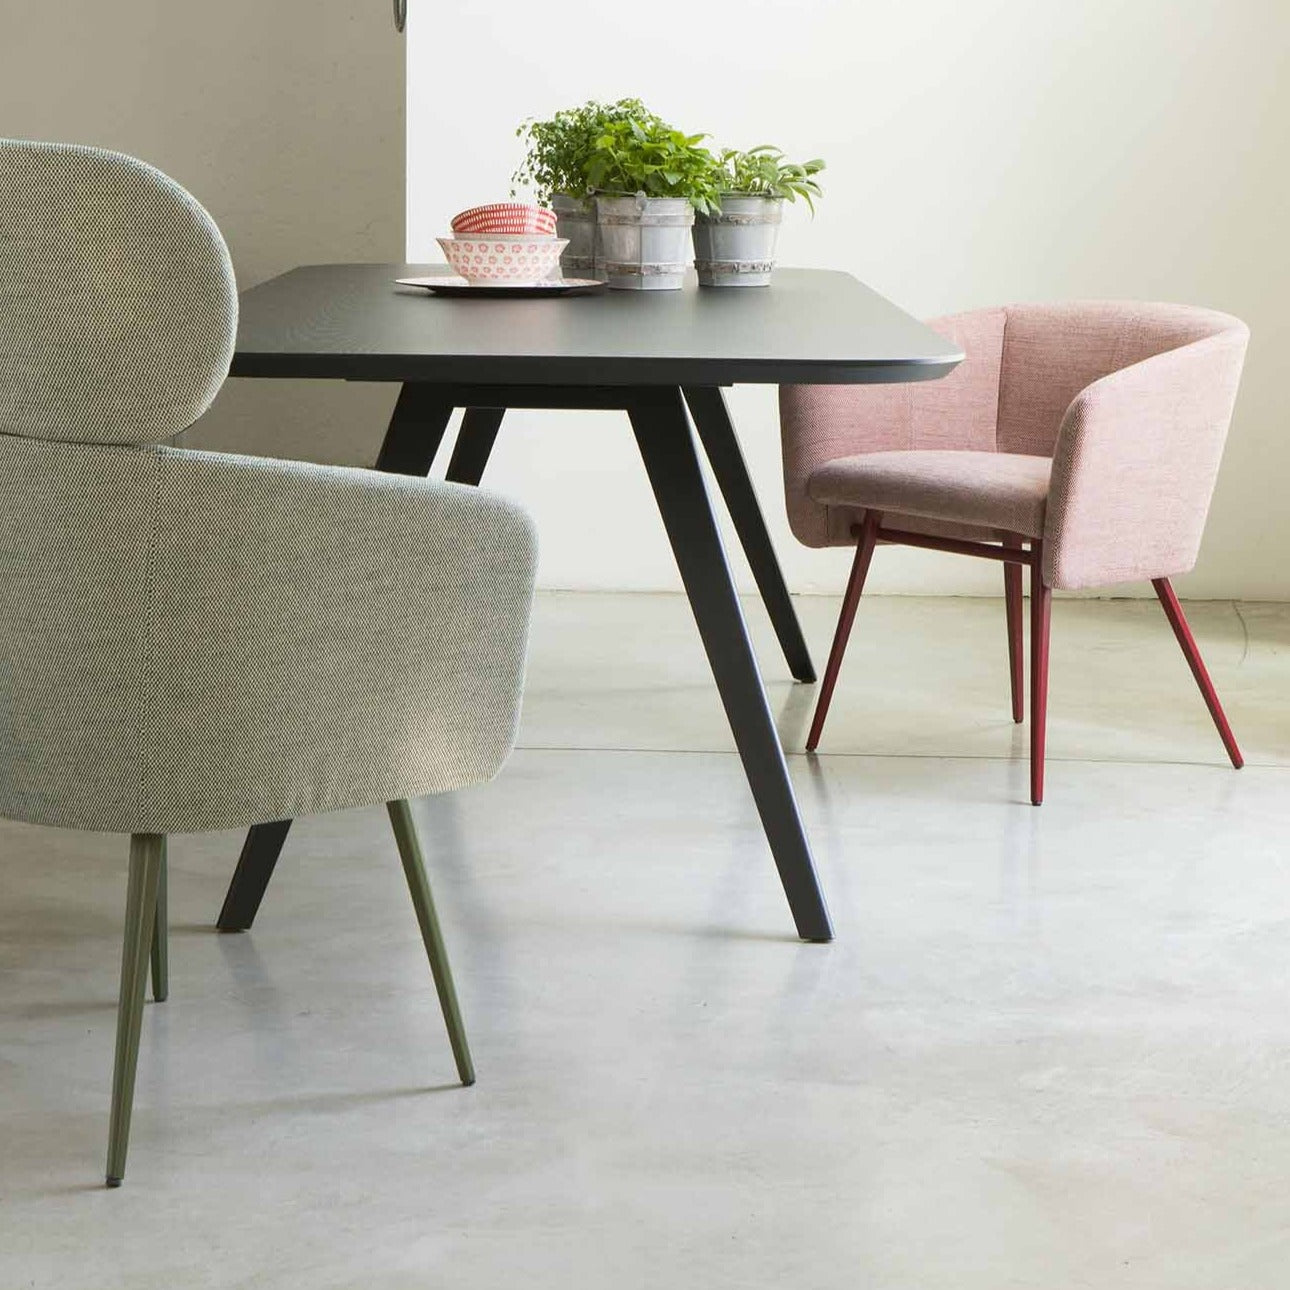 BALU MET Armchair interior view, grey and pink with table